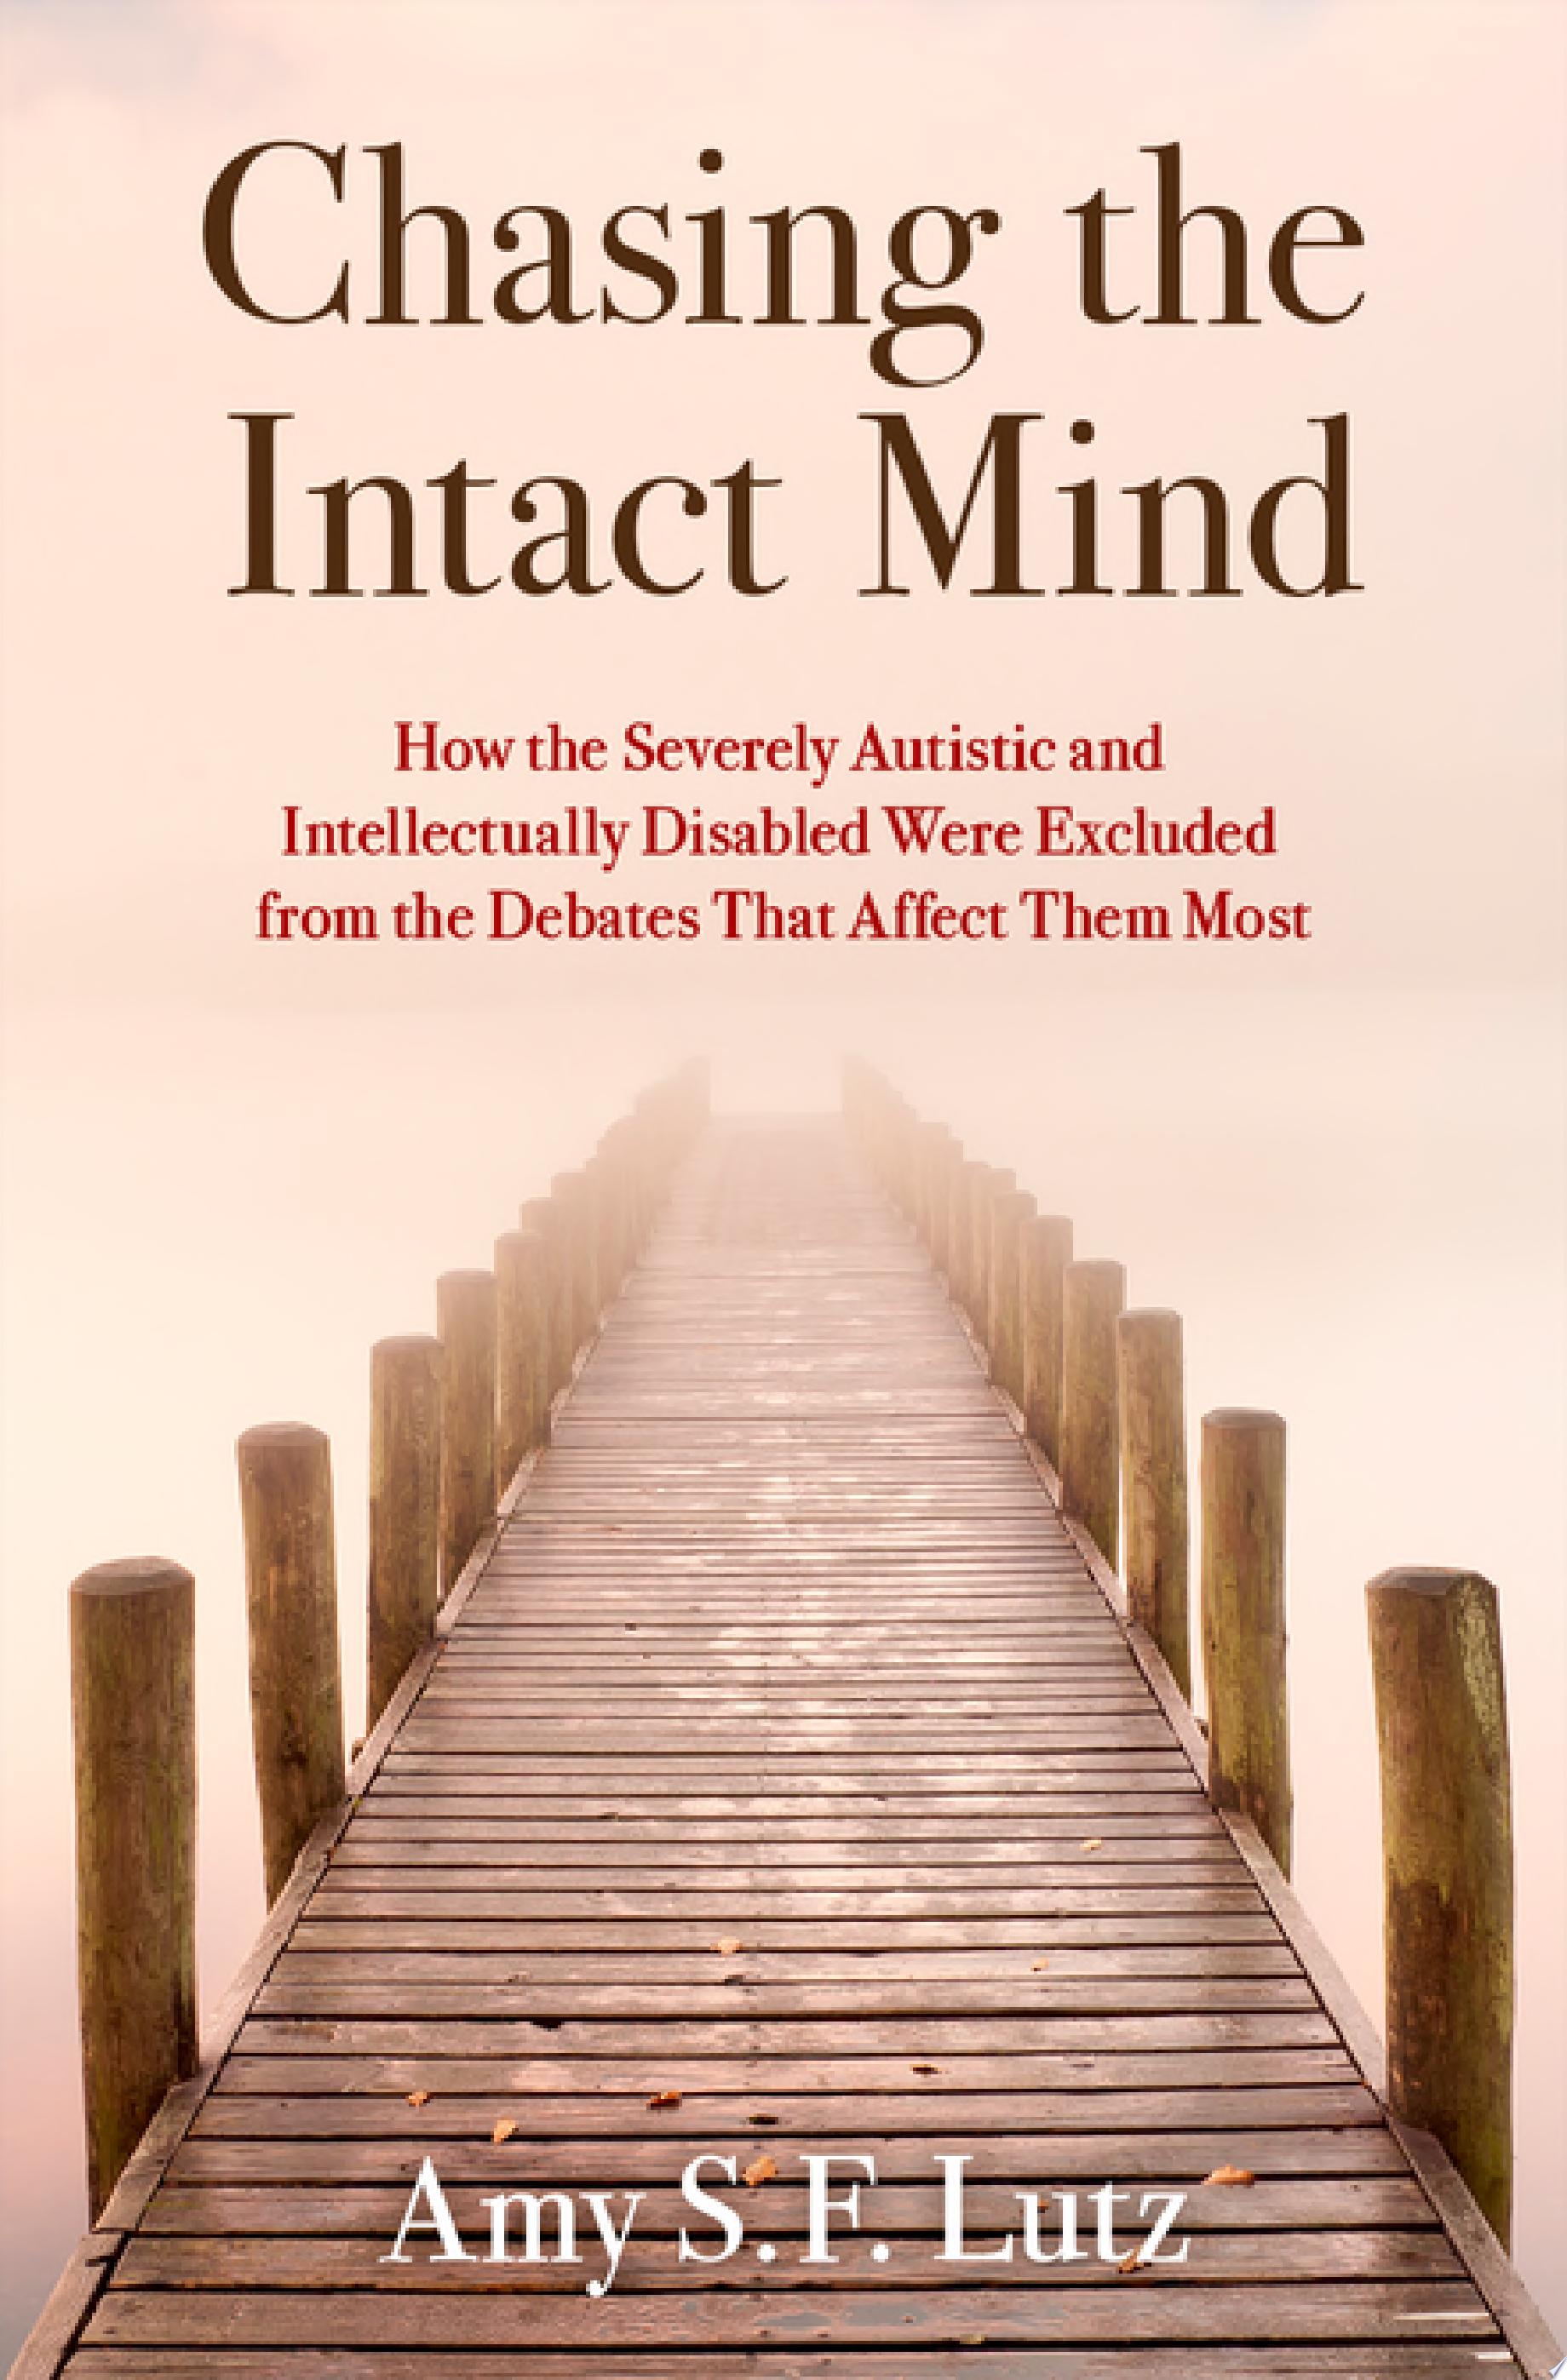 Image for "Chasing the Intact Mind"